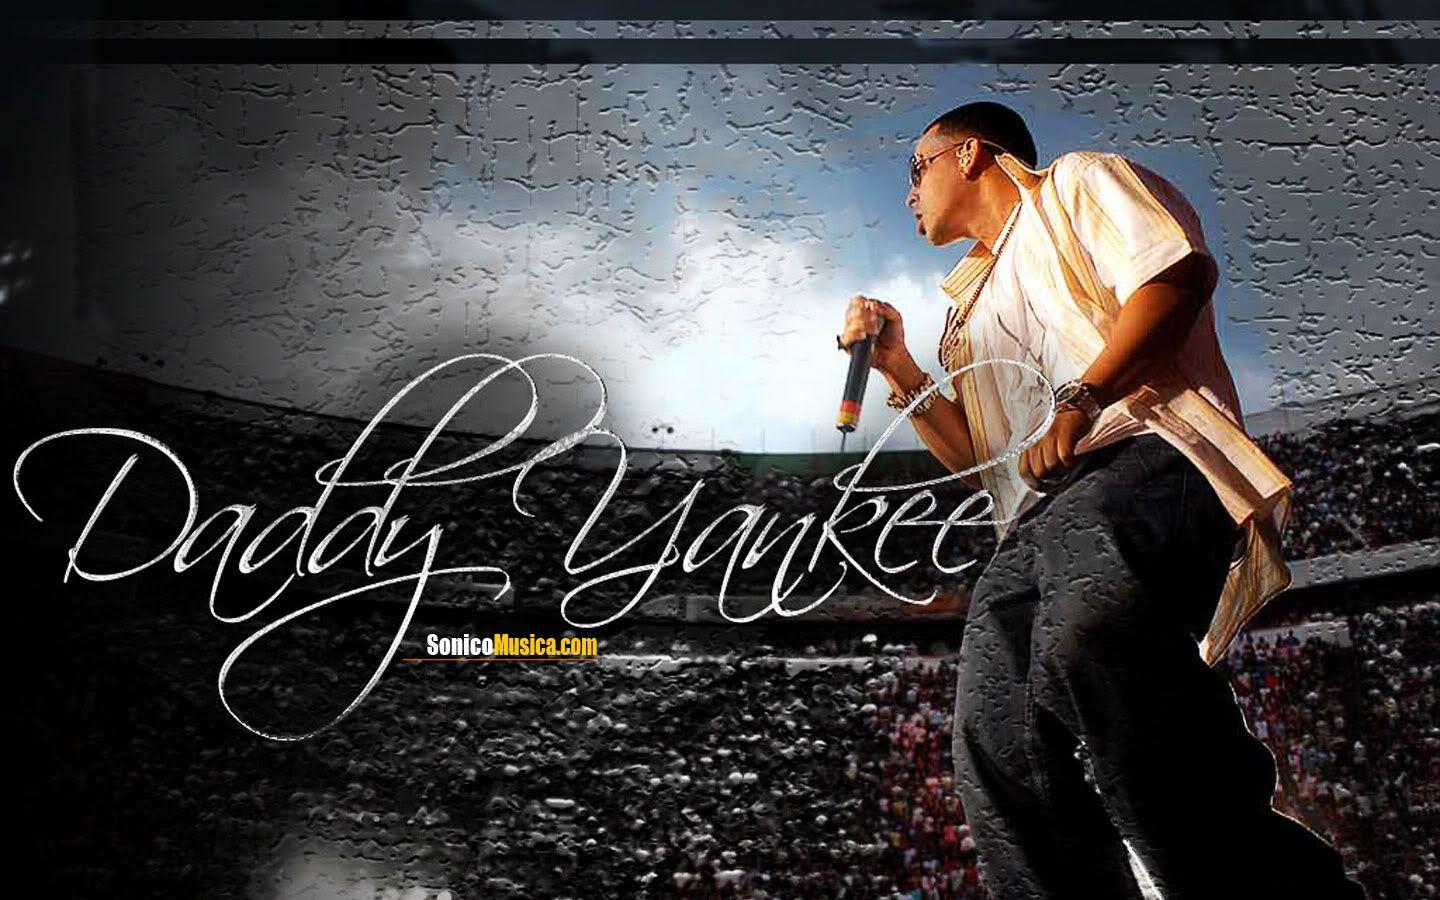 DADY YANKEE graphics and comments